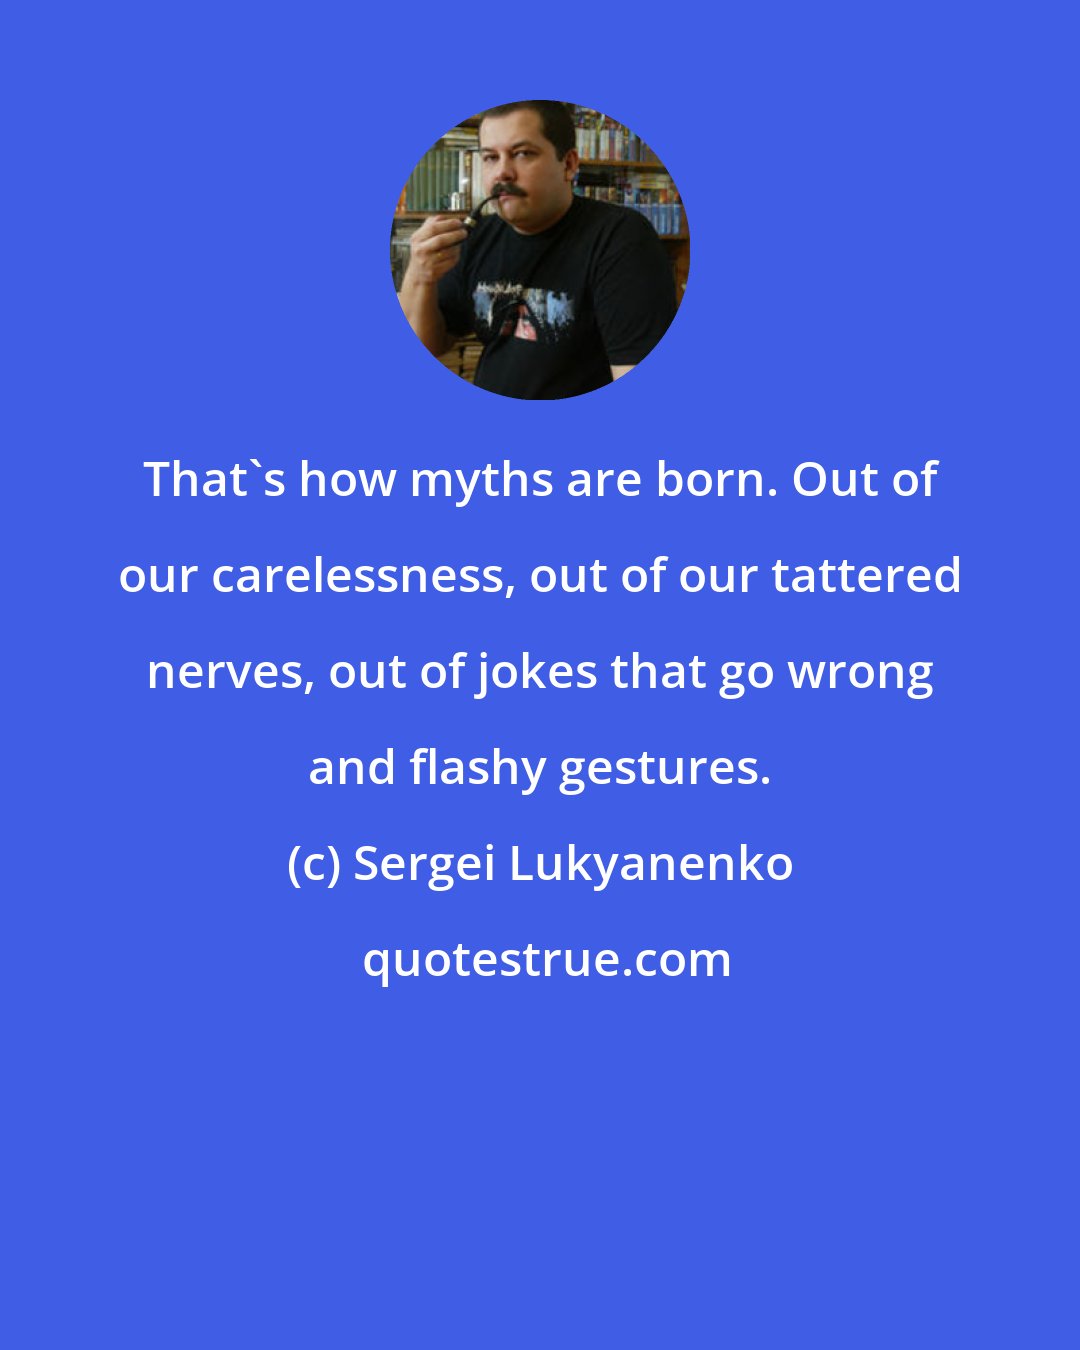 Sergei Lukyanenko: That's how myths are born. Out of our carelessness, out of our tattered nerves, out of jokes that go wrong and flashy gestures.